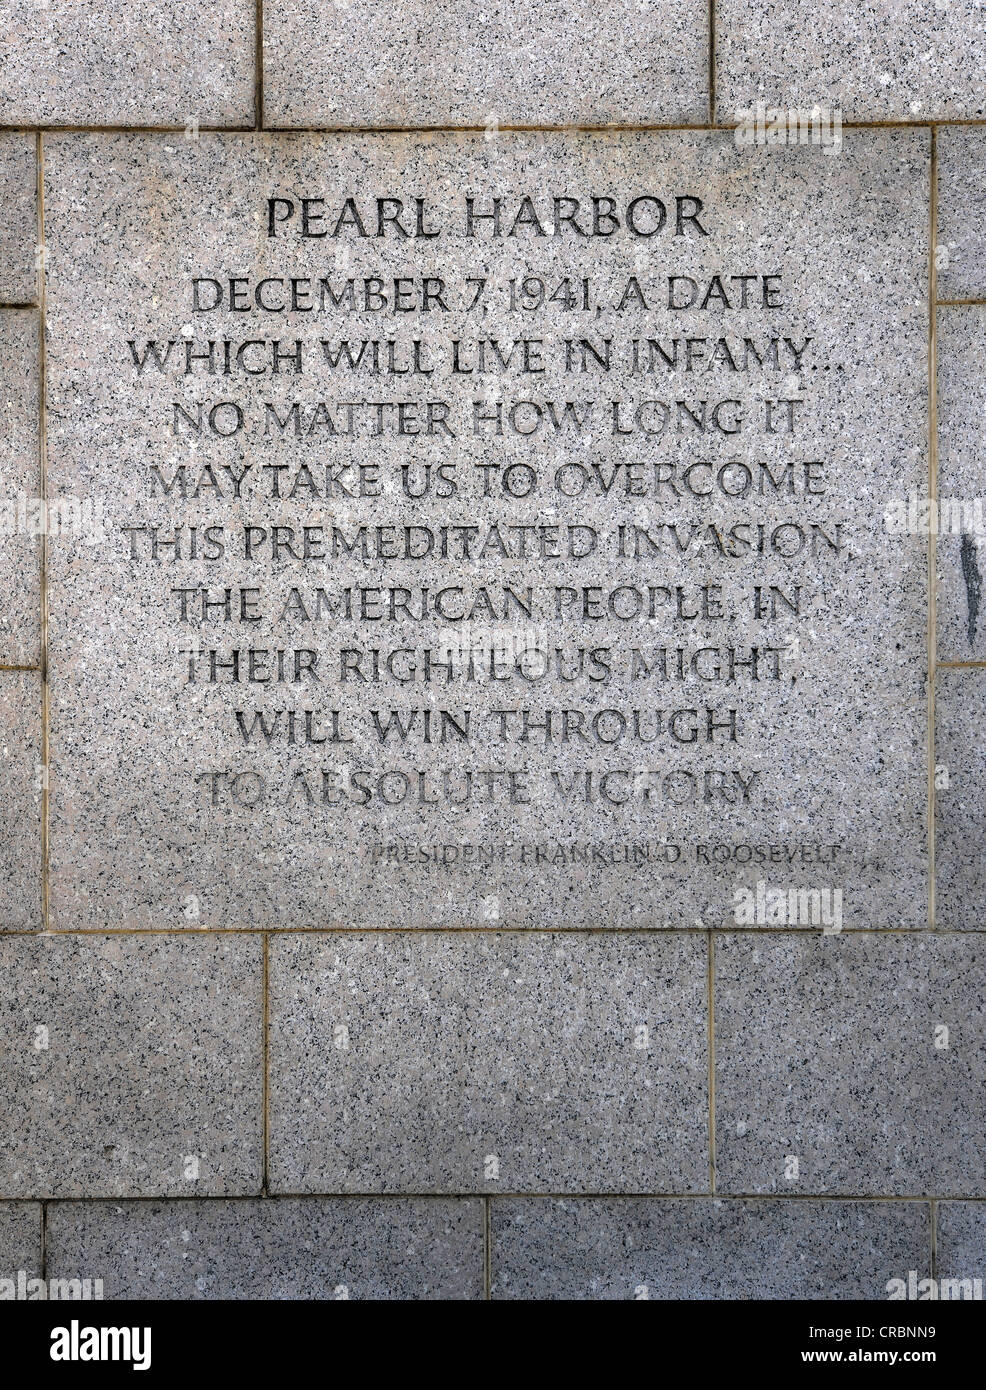 Inscription, excerpt of the Pearl Harbour Speech by Franklin D. Roosevelt, National World War II Memorial, WWII Memorial or Stock Photo